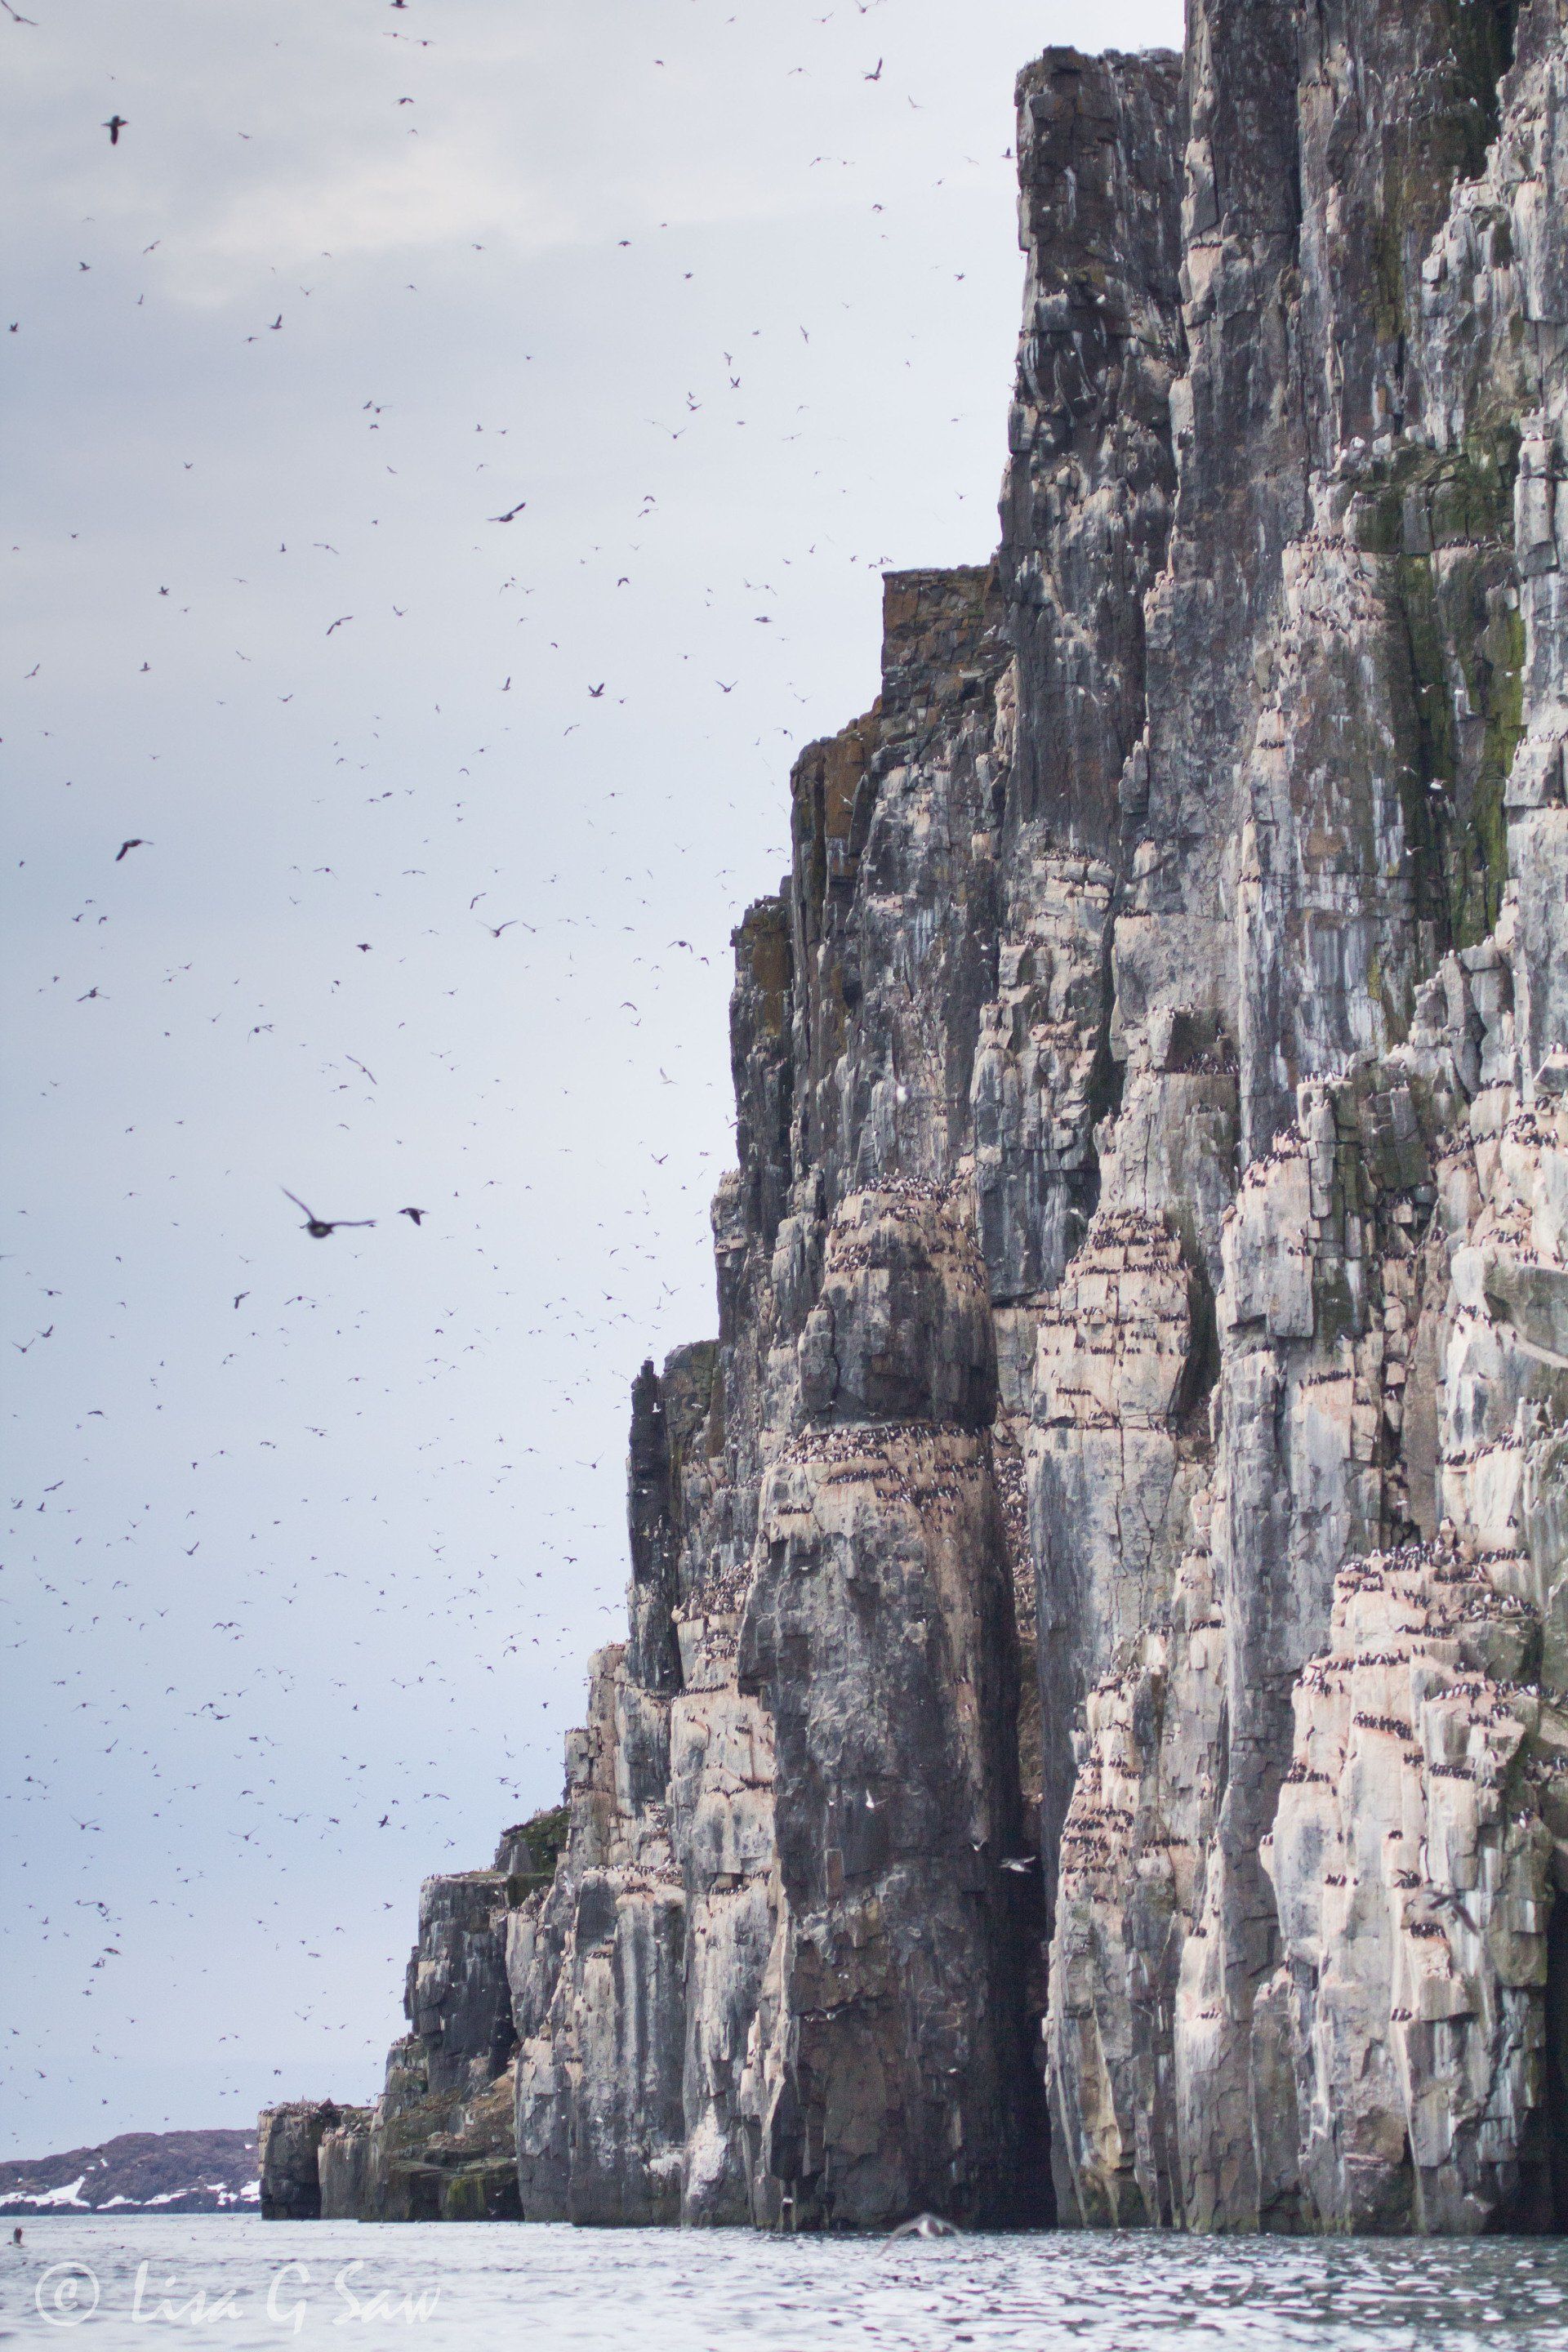 Millions of seabirds flying and nesting at Alkefjellet